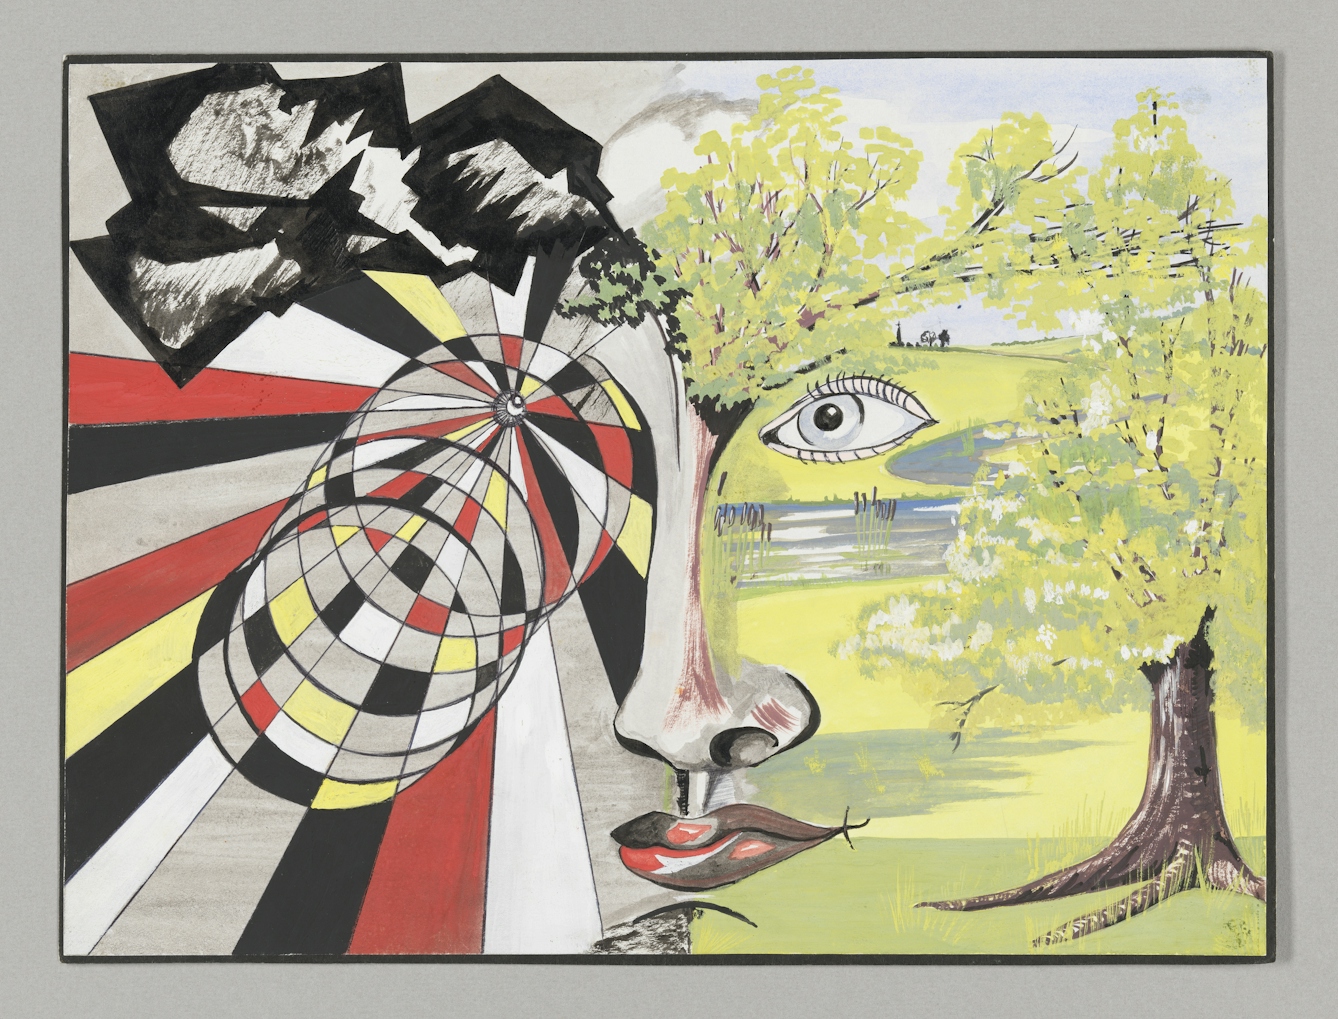 The right half of the image is a serene pale green landscape of trees and a flowing stream with rushes. Emerging from this in the centre of the painting is a wonan's face with an eye floating in the landscape and a nose and mouth forming form the trunk of a tree. The left of the painting is a graphic mattern of chequered circles and radiating lines in red, yellow, plack and grey. 